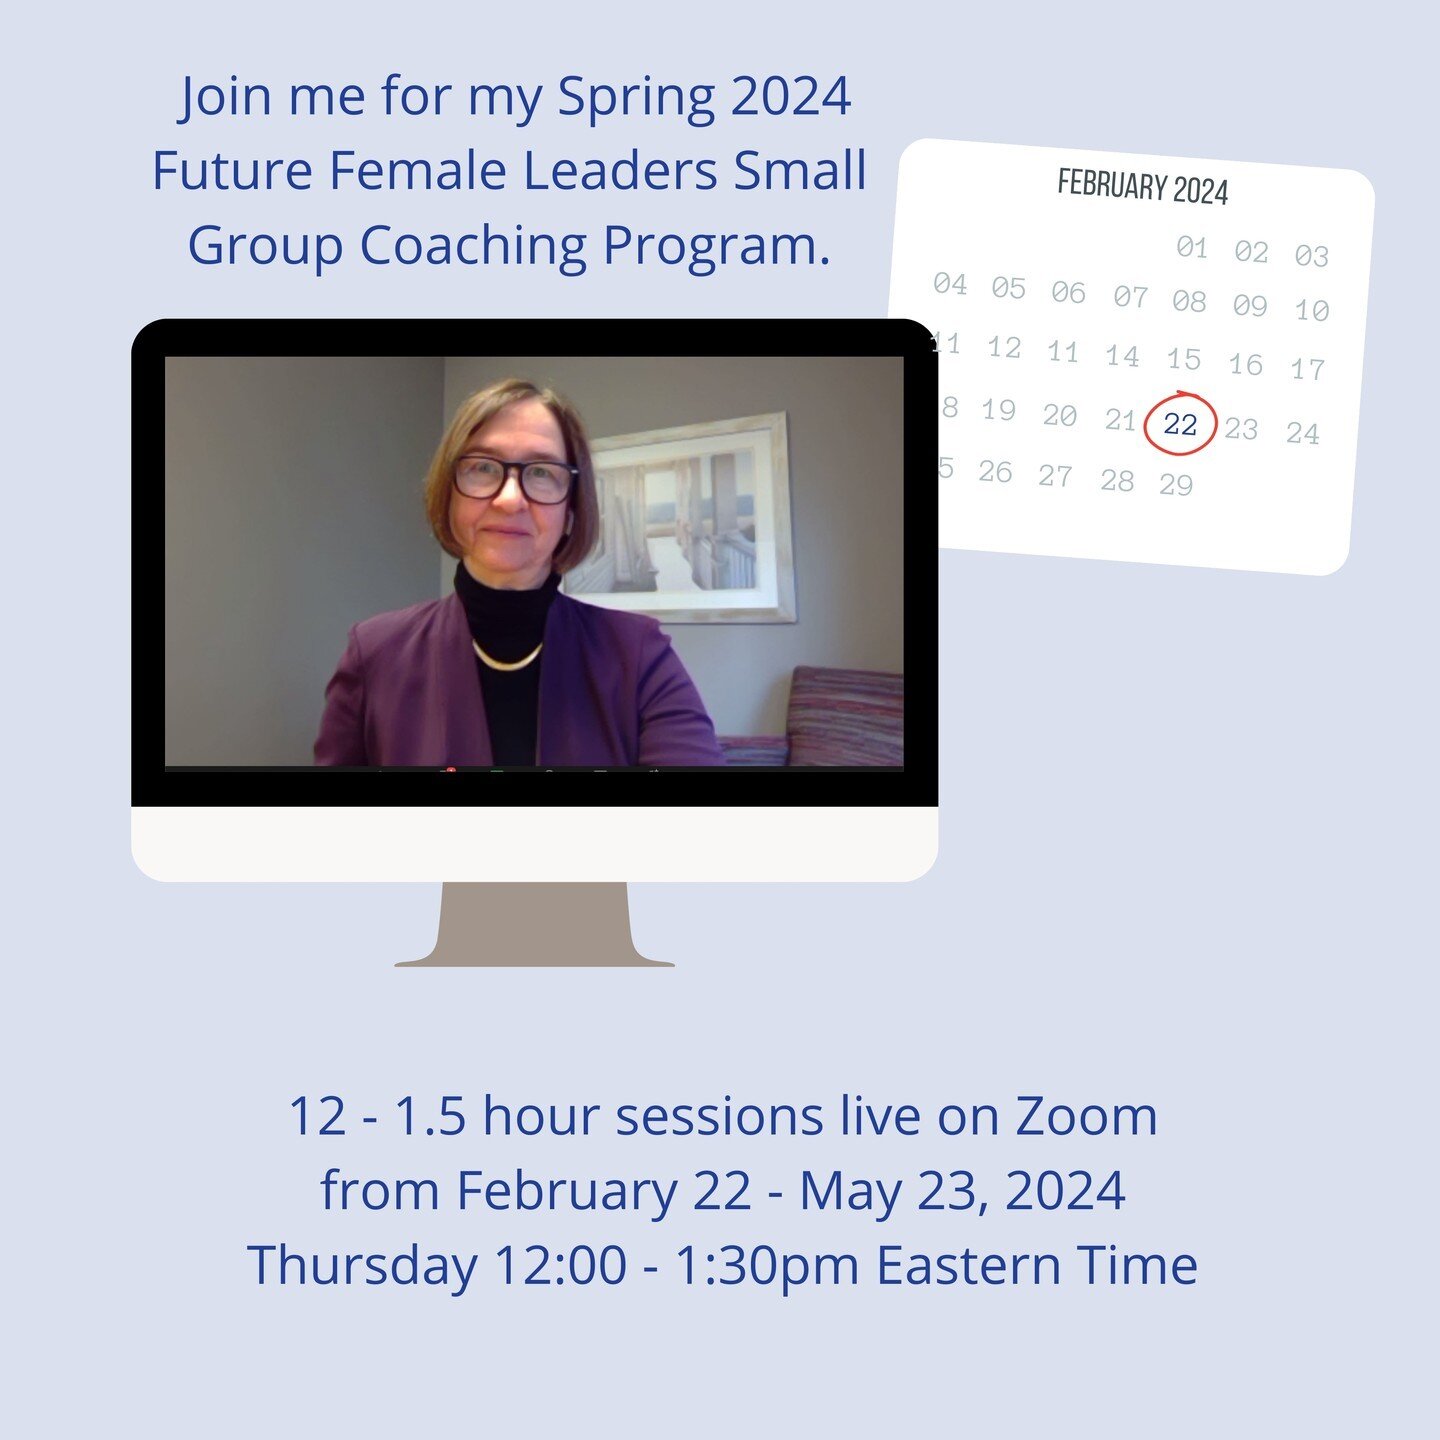 Join my Spring 2024 Group Coaching Program for Future Female Leaders starting Thursday February 22, 2024.  This live virtual program is designed to support women on track for management and leadership roles, or early in their leadership careers.

The